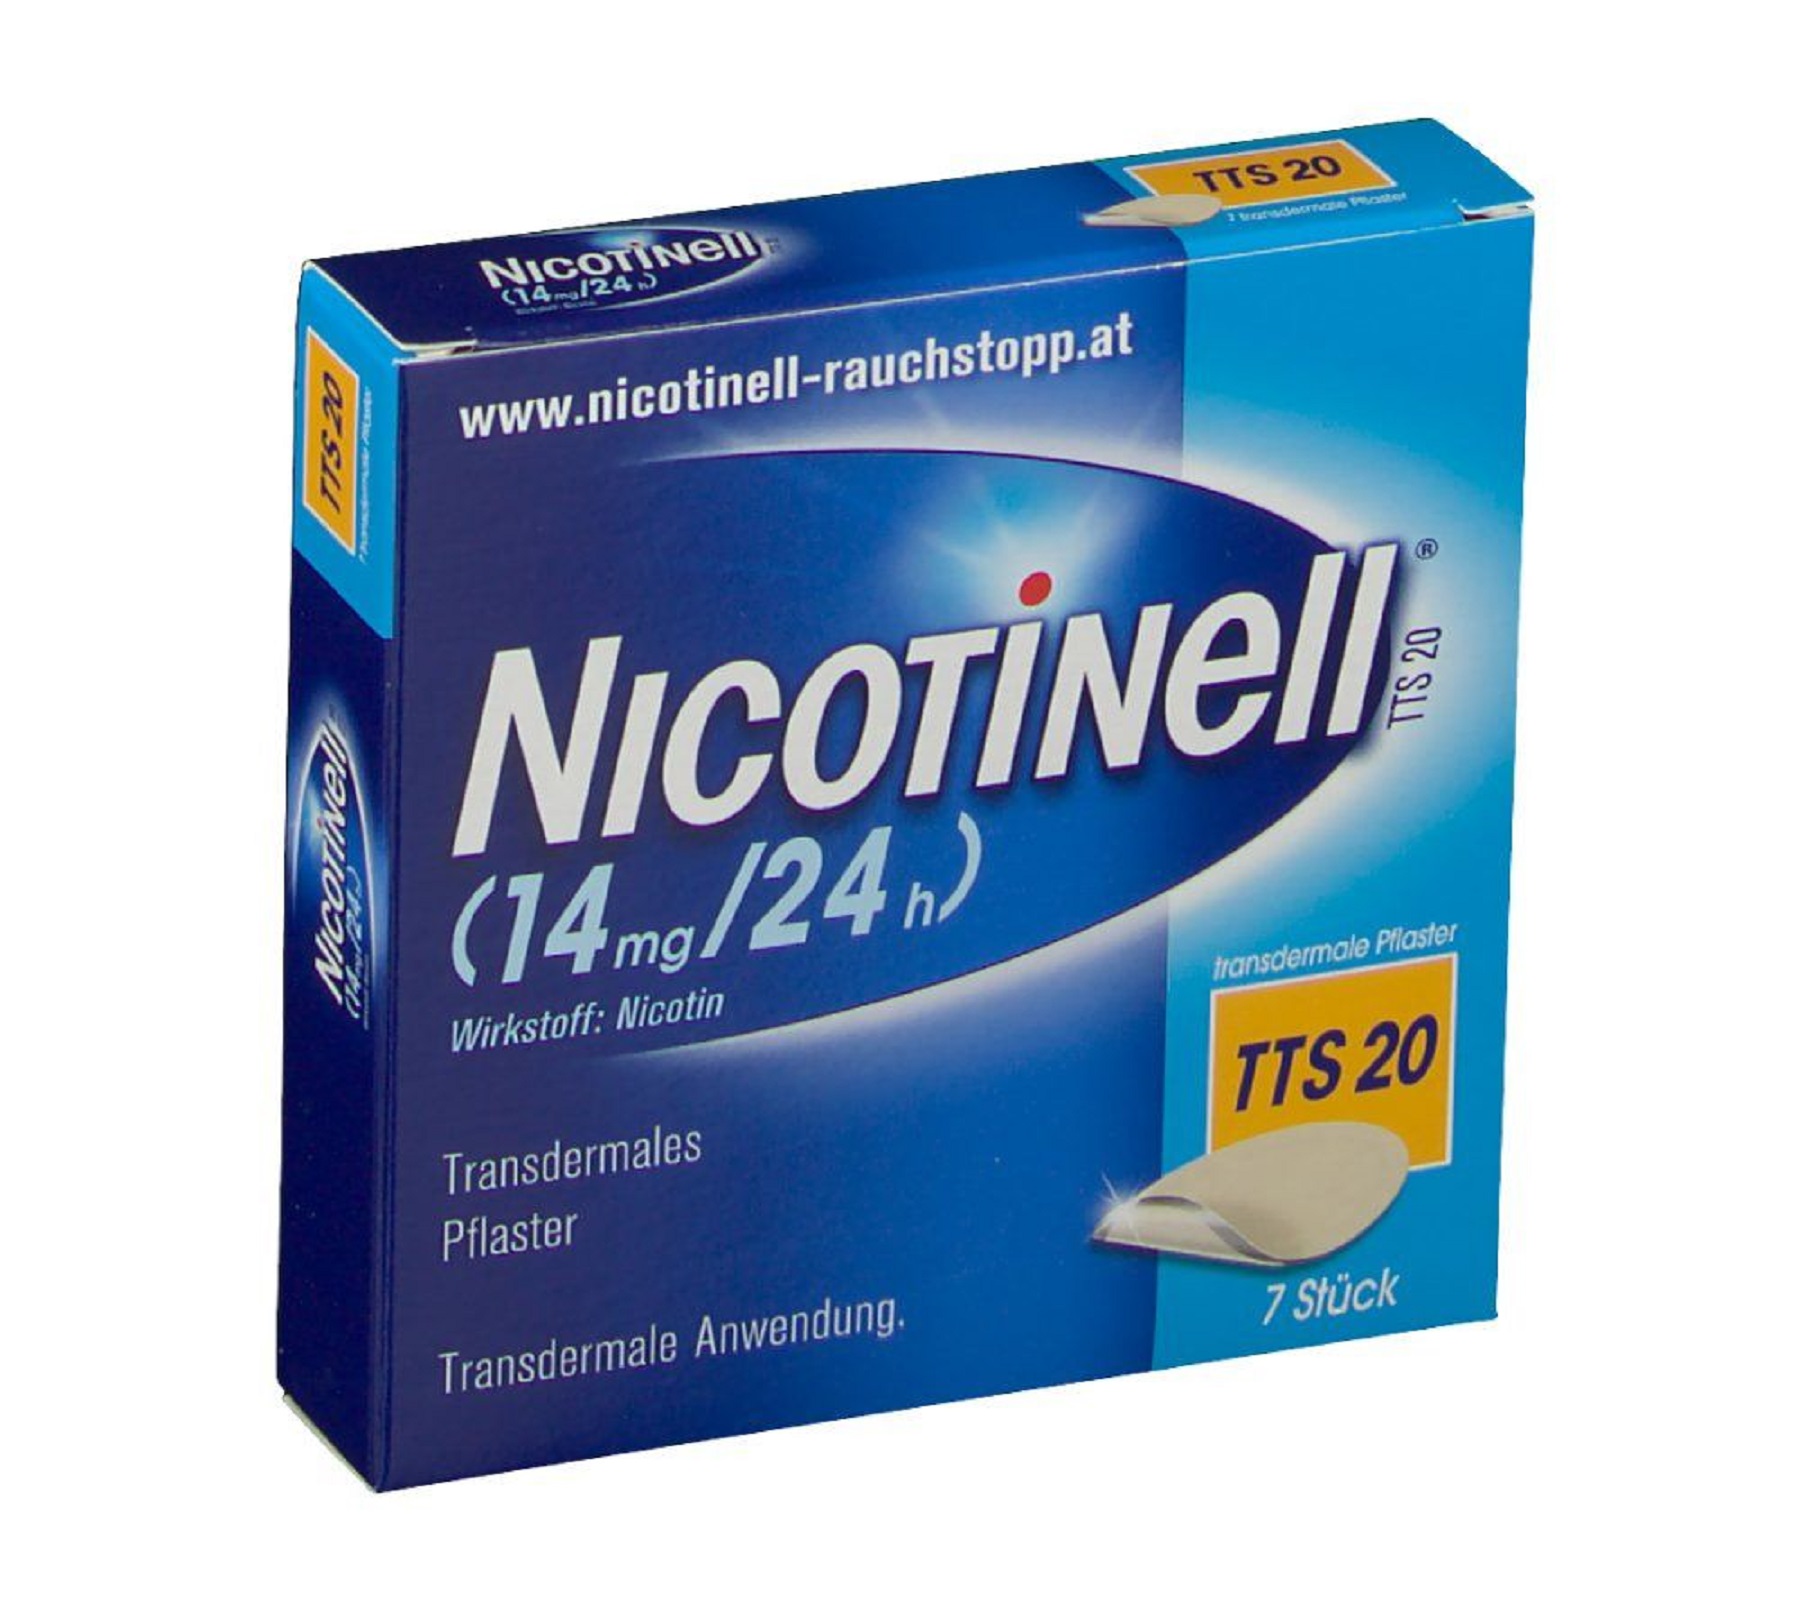 Nicotinell TTS 20 (14 mg/24 h) - transdermale Pflaster